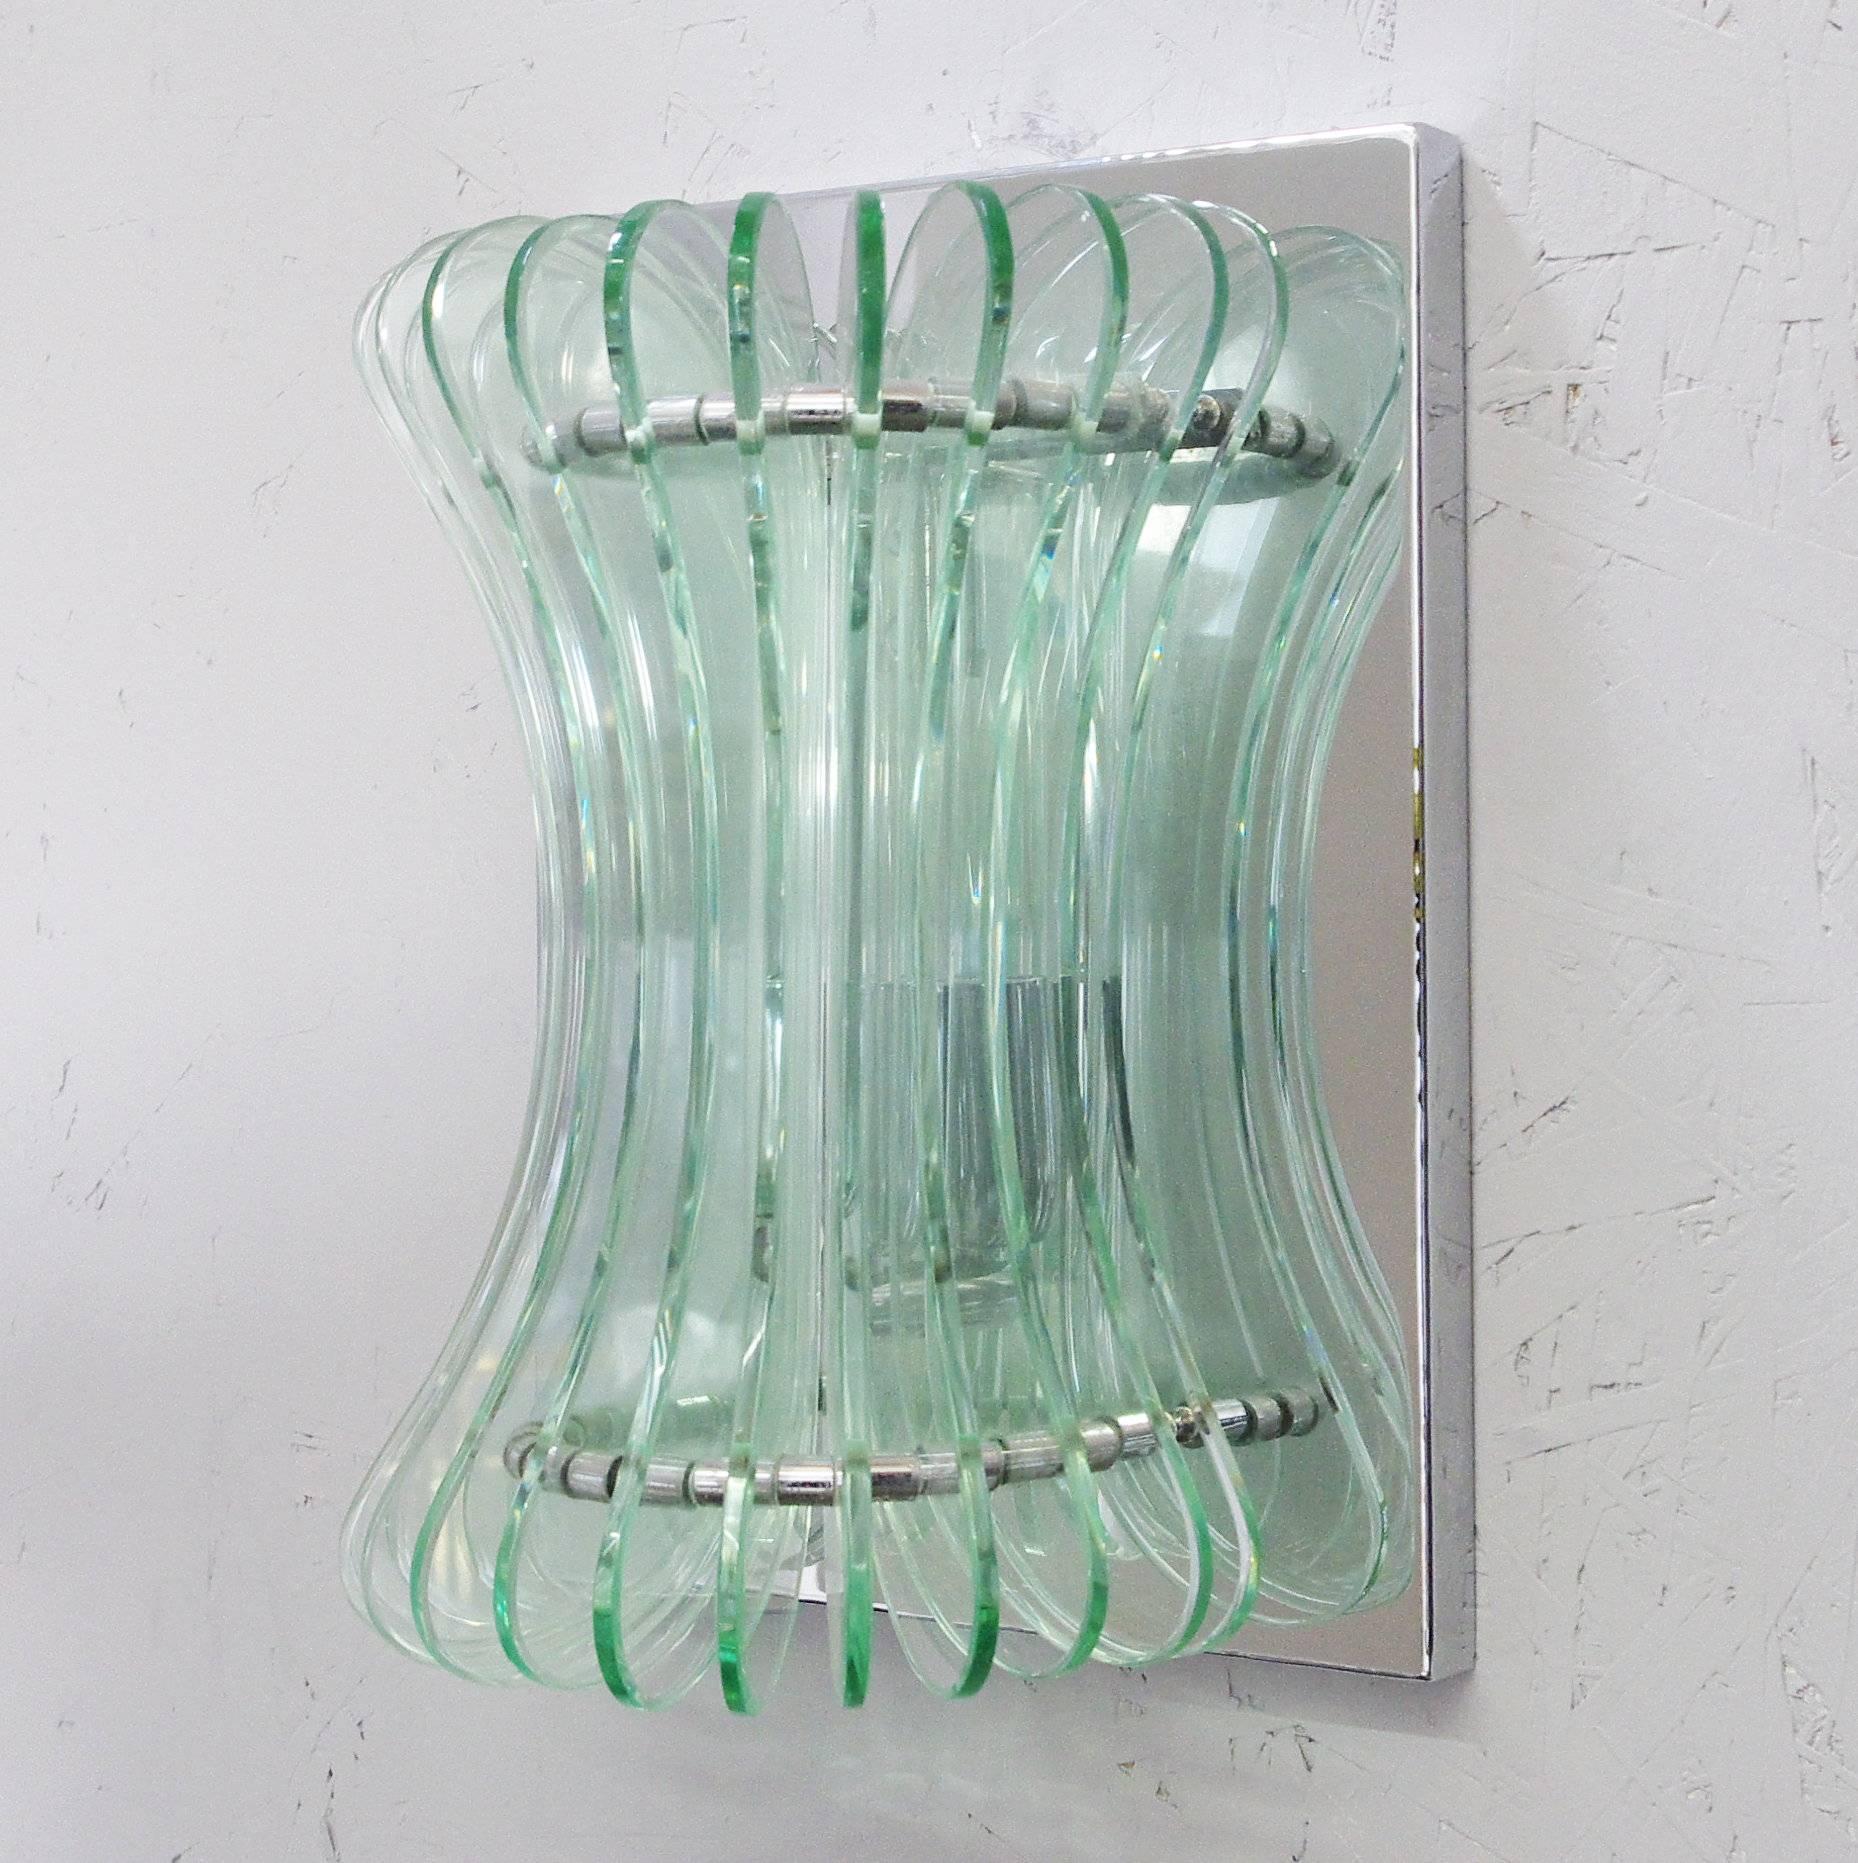 Pair of Vintage Italian Sconces w/ Beveled Glass Designed by Cristal Arte, 1960s For Sale 5